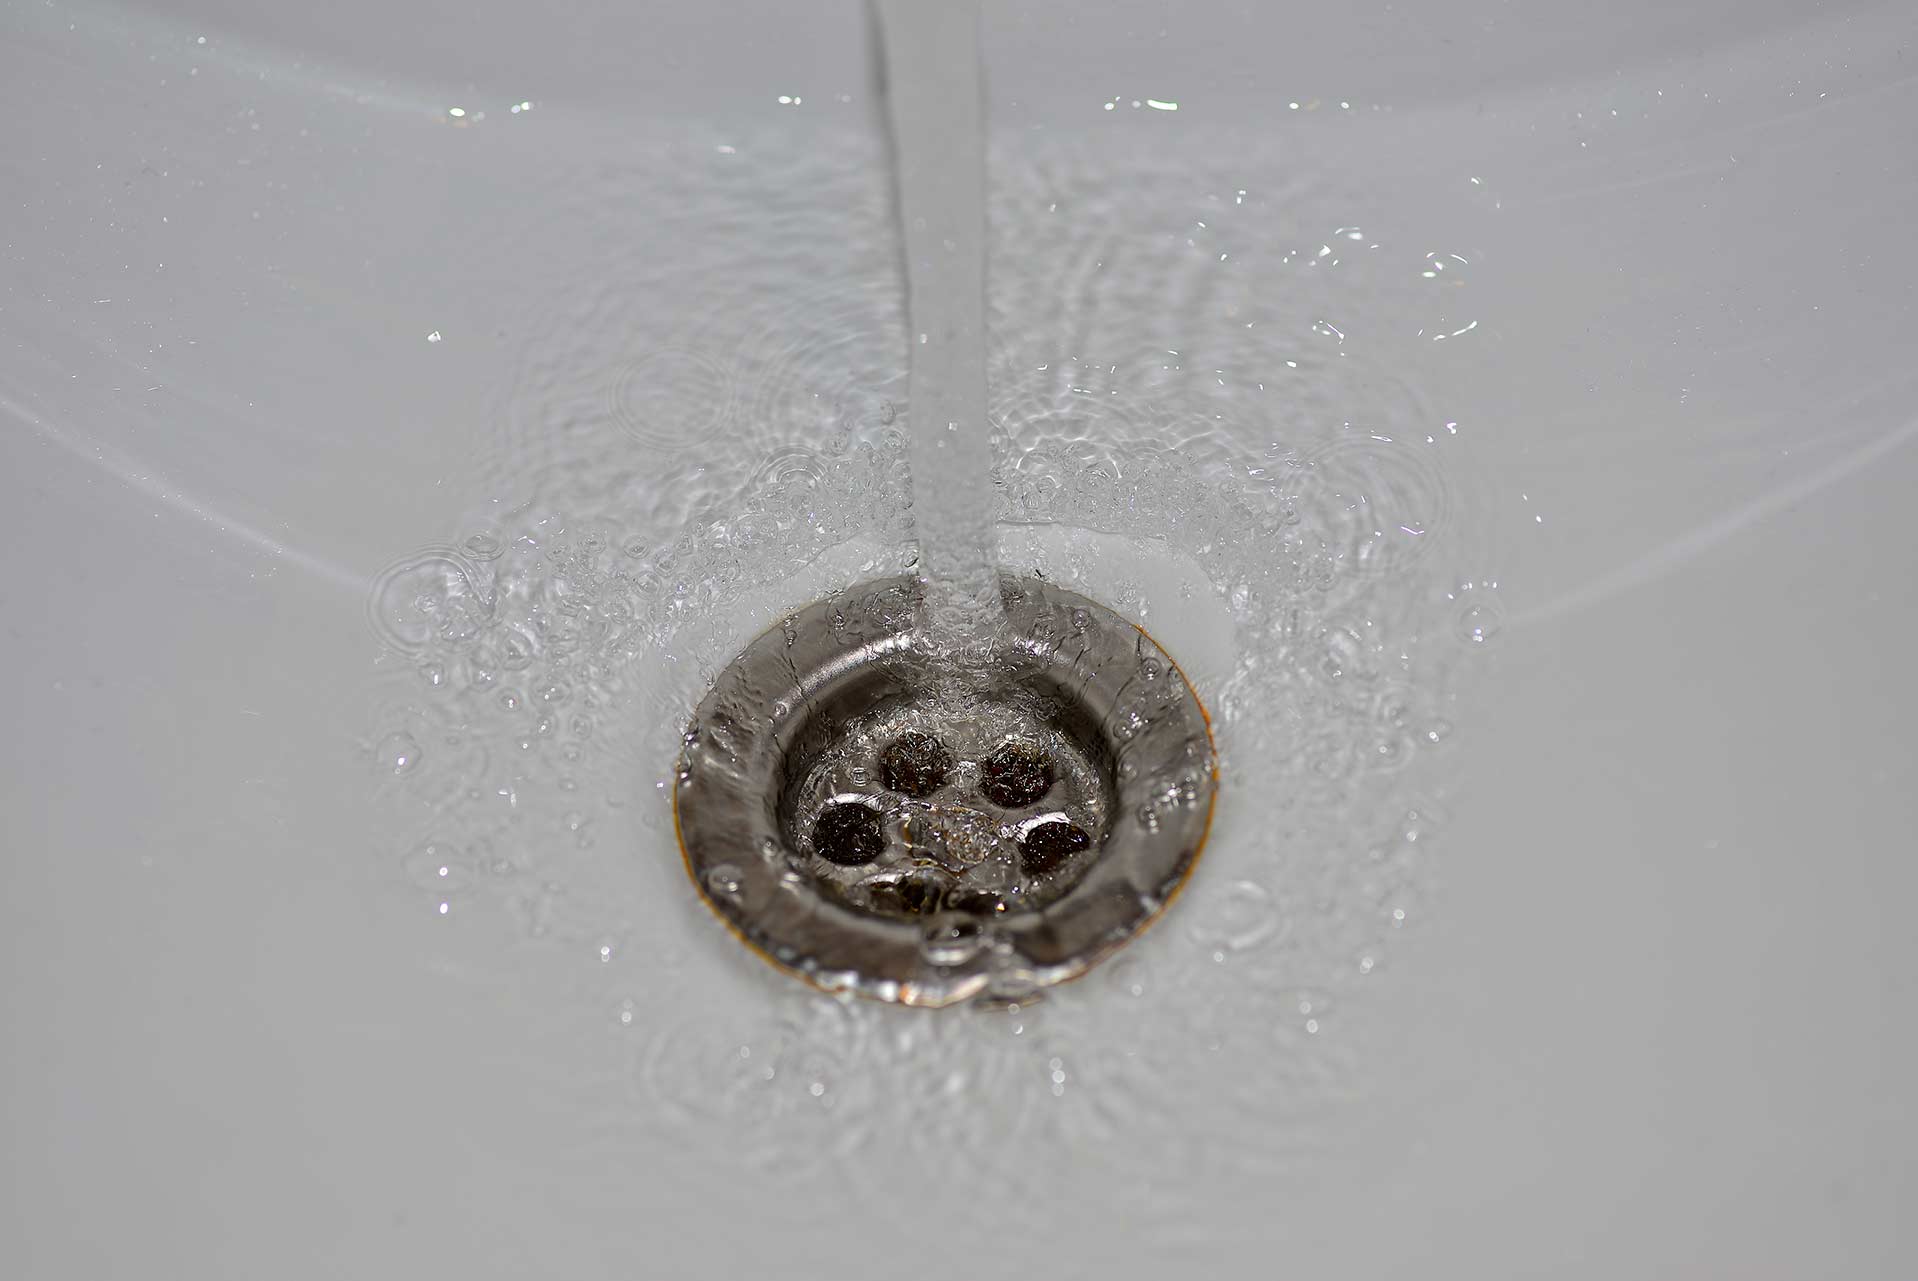 A2B Drains provides services to unblock blocked sinks and drains for properties in Havering.